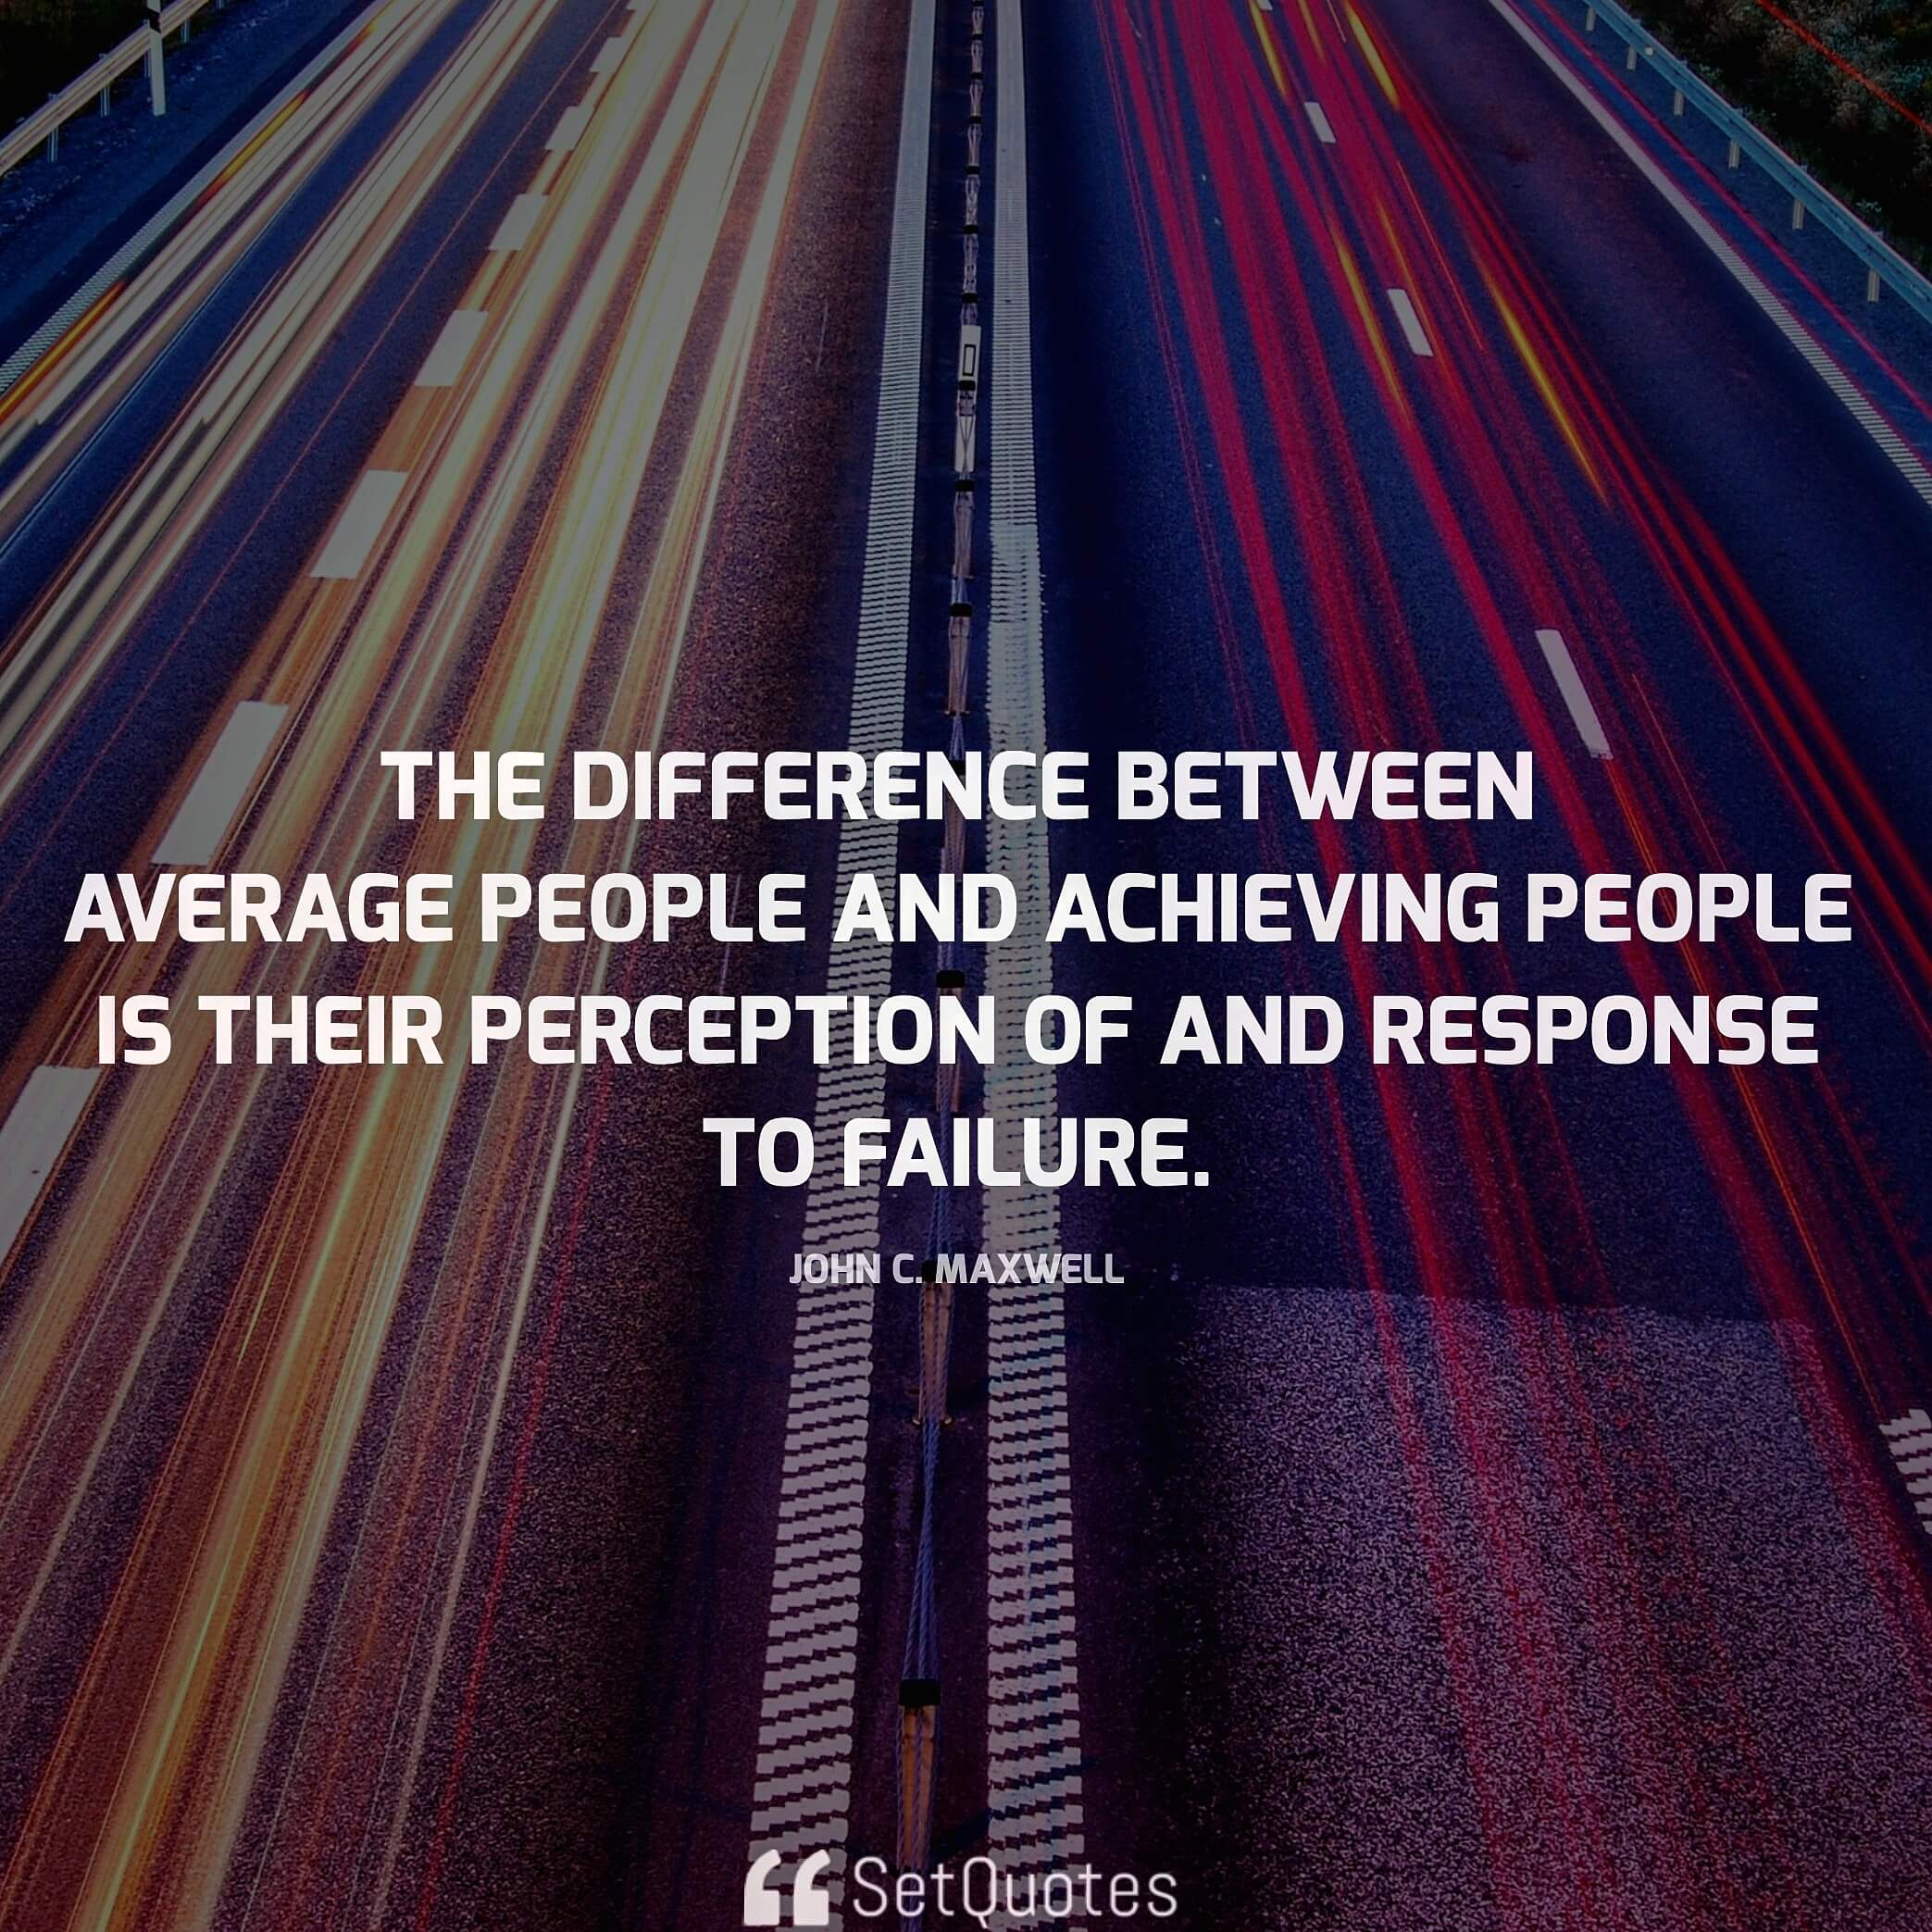 The difference between average people and achieving people is their perception of and response to failure. - John C. Maxwell